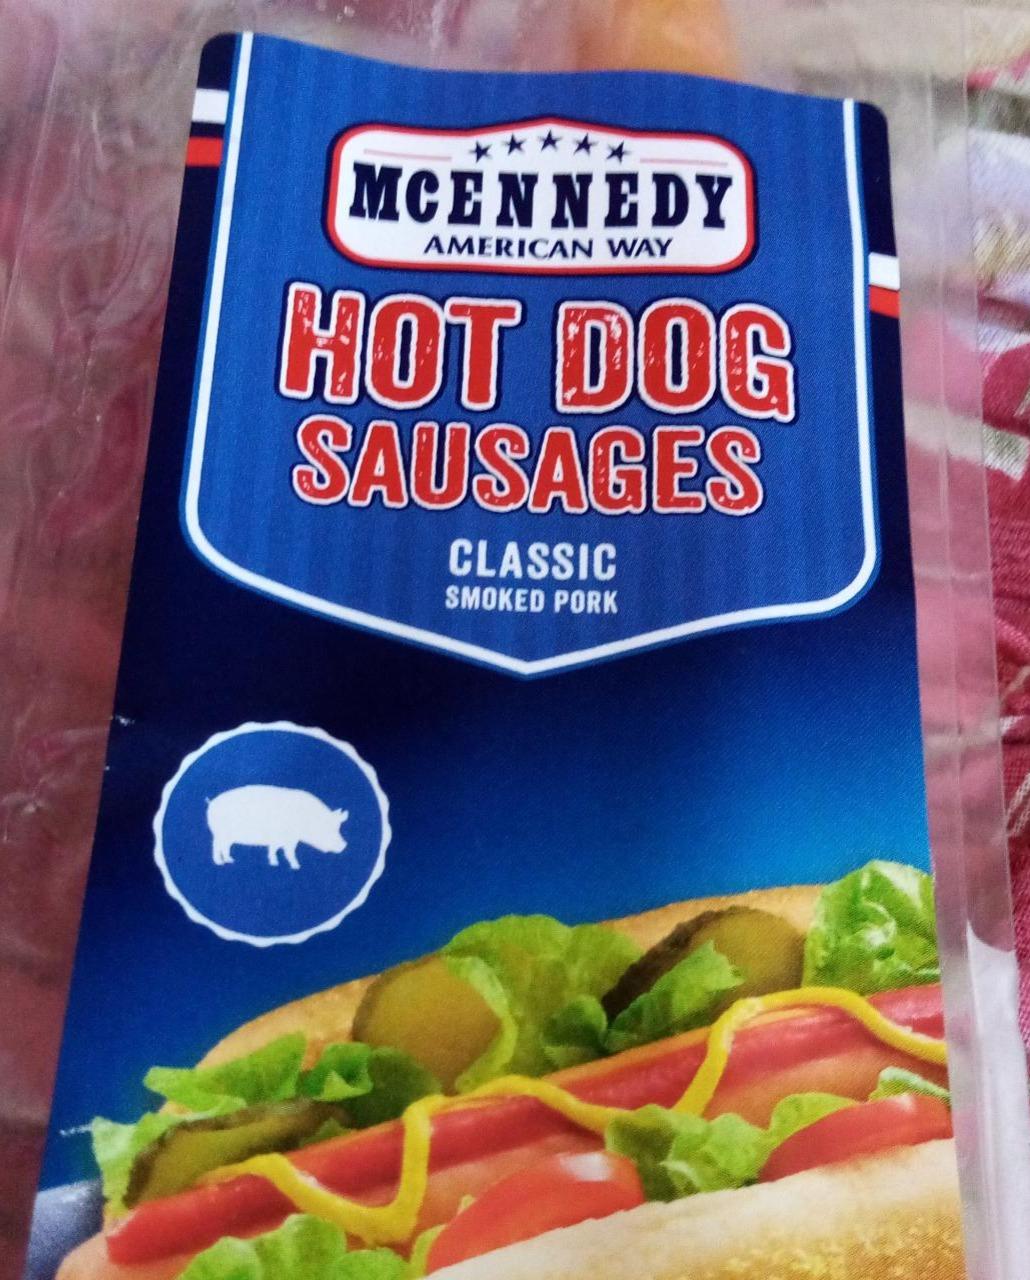 Fotografie - Hot Dog Sausages Classic Smoked Pork McEnnedy American Way